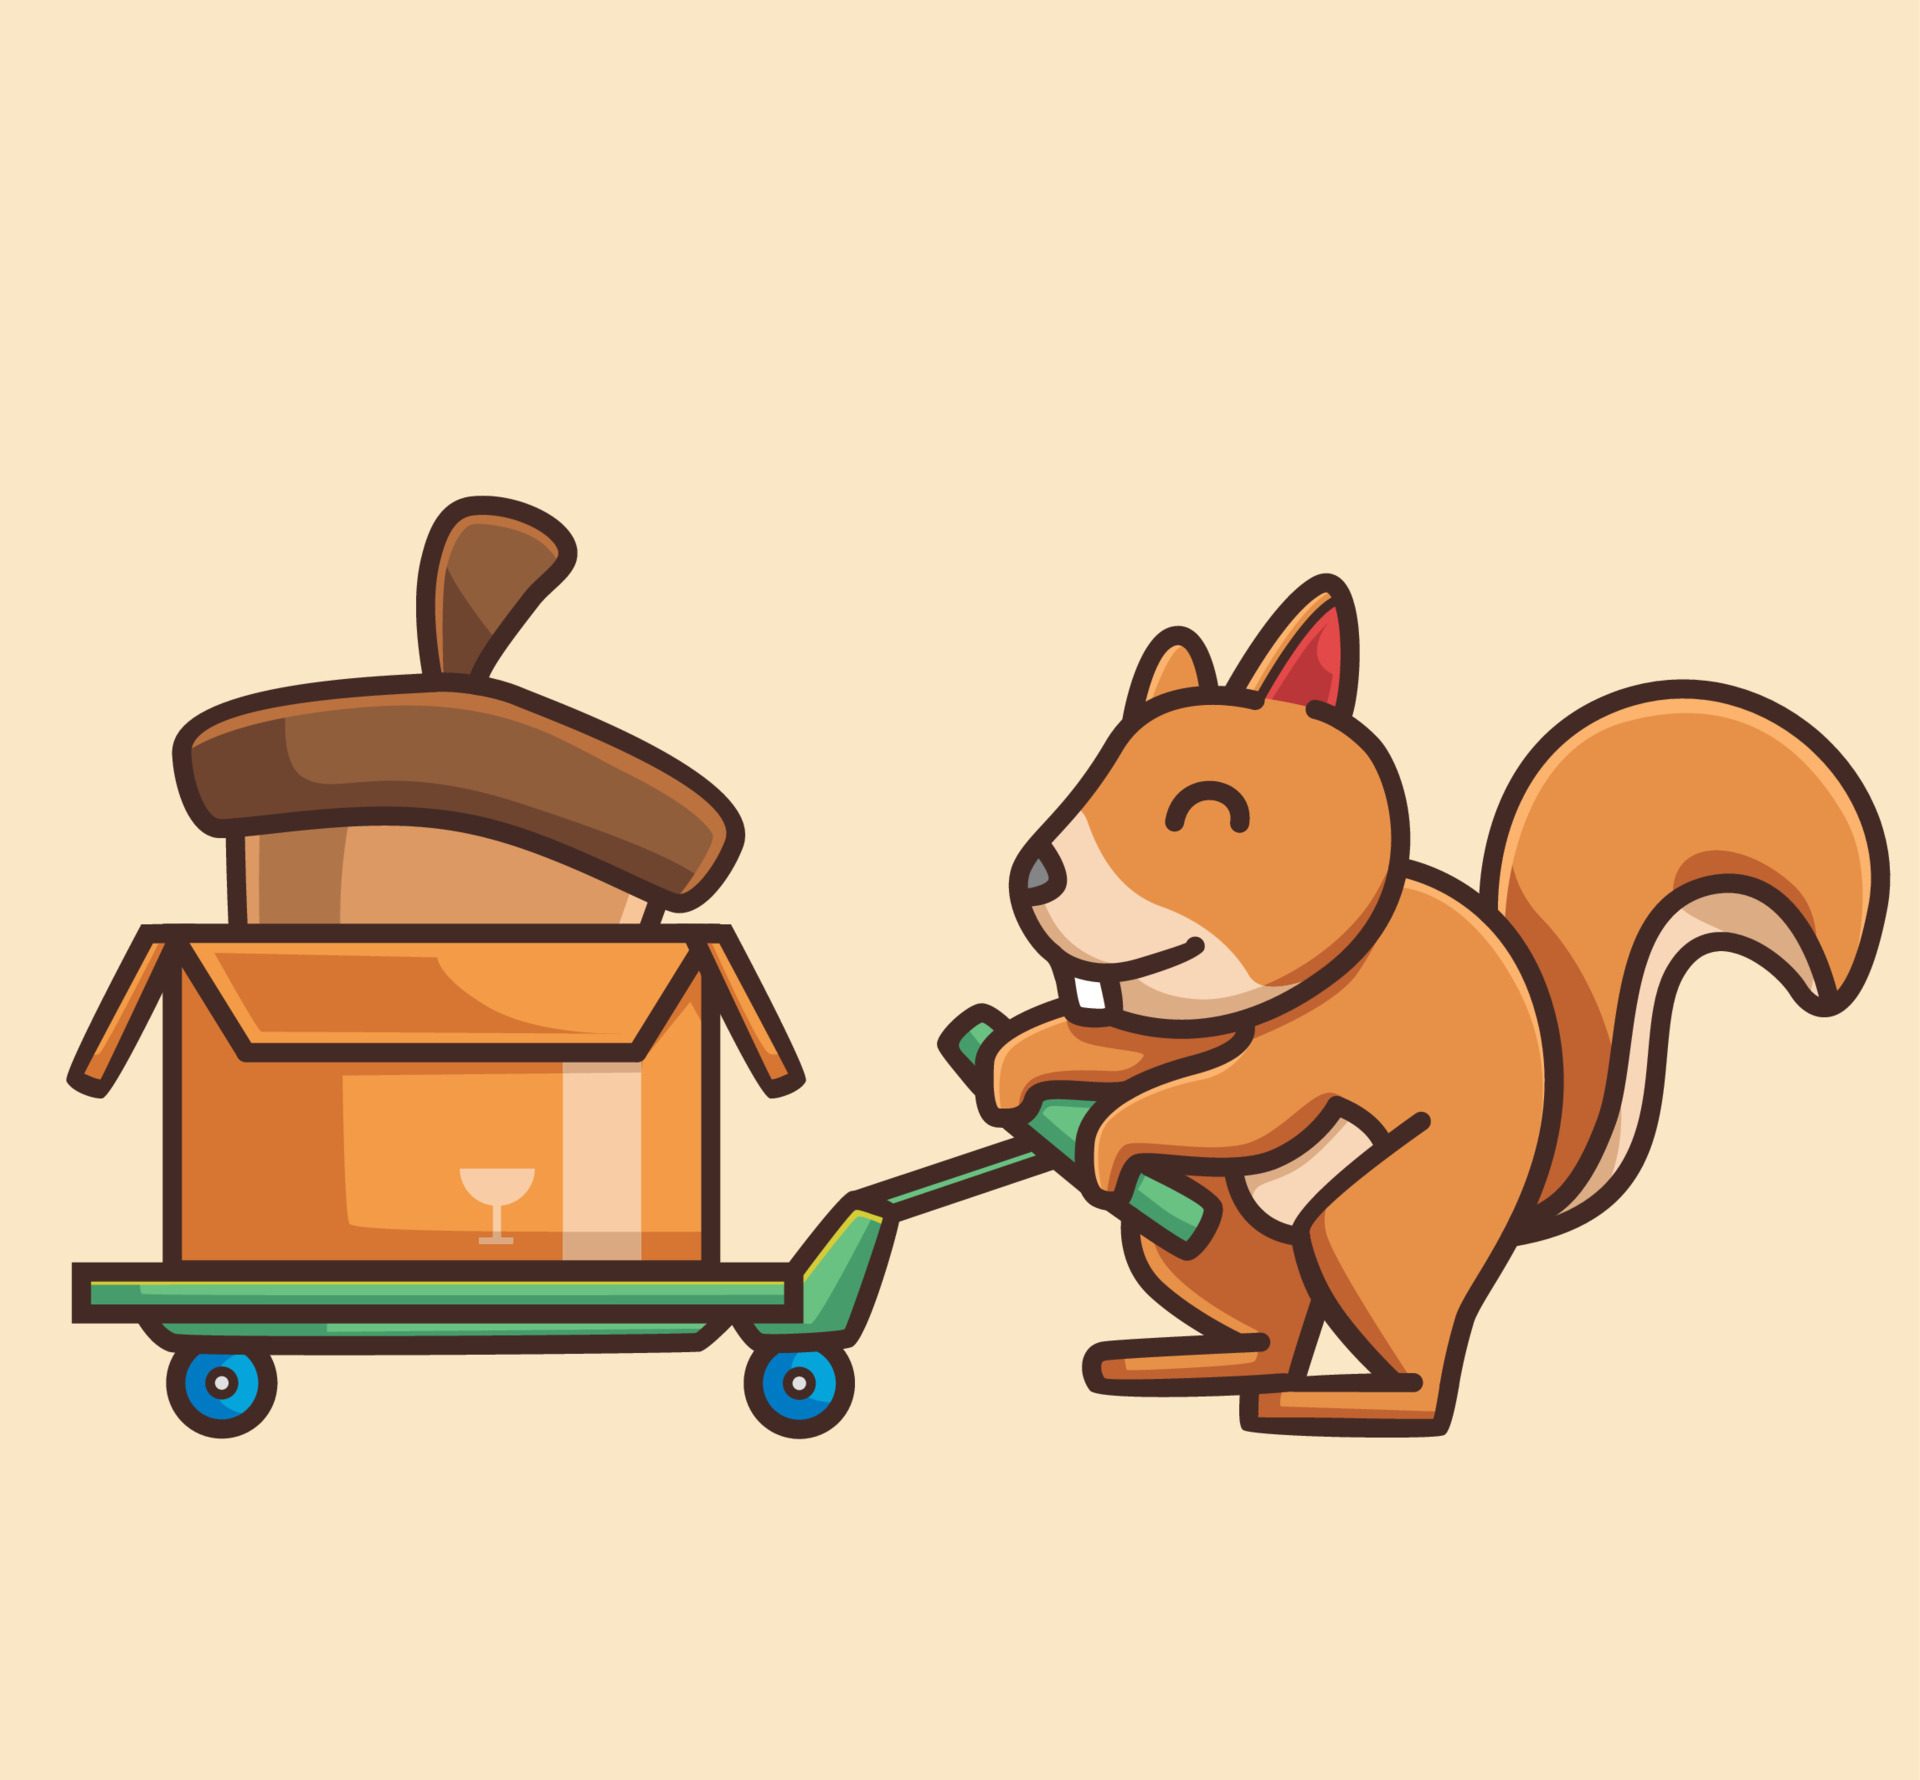 https://static.vecteezy.com/system/resources/previews/010/806/293/original/cute-squirrel-shop-the-giant-nut-animal-flat-cartoon-style-illustration-icon-premium-logo-mascot-suitable-for-web-design-banner-character-vector.jpg